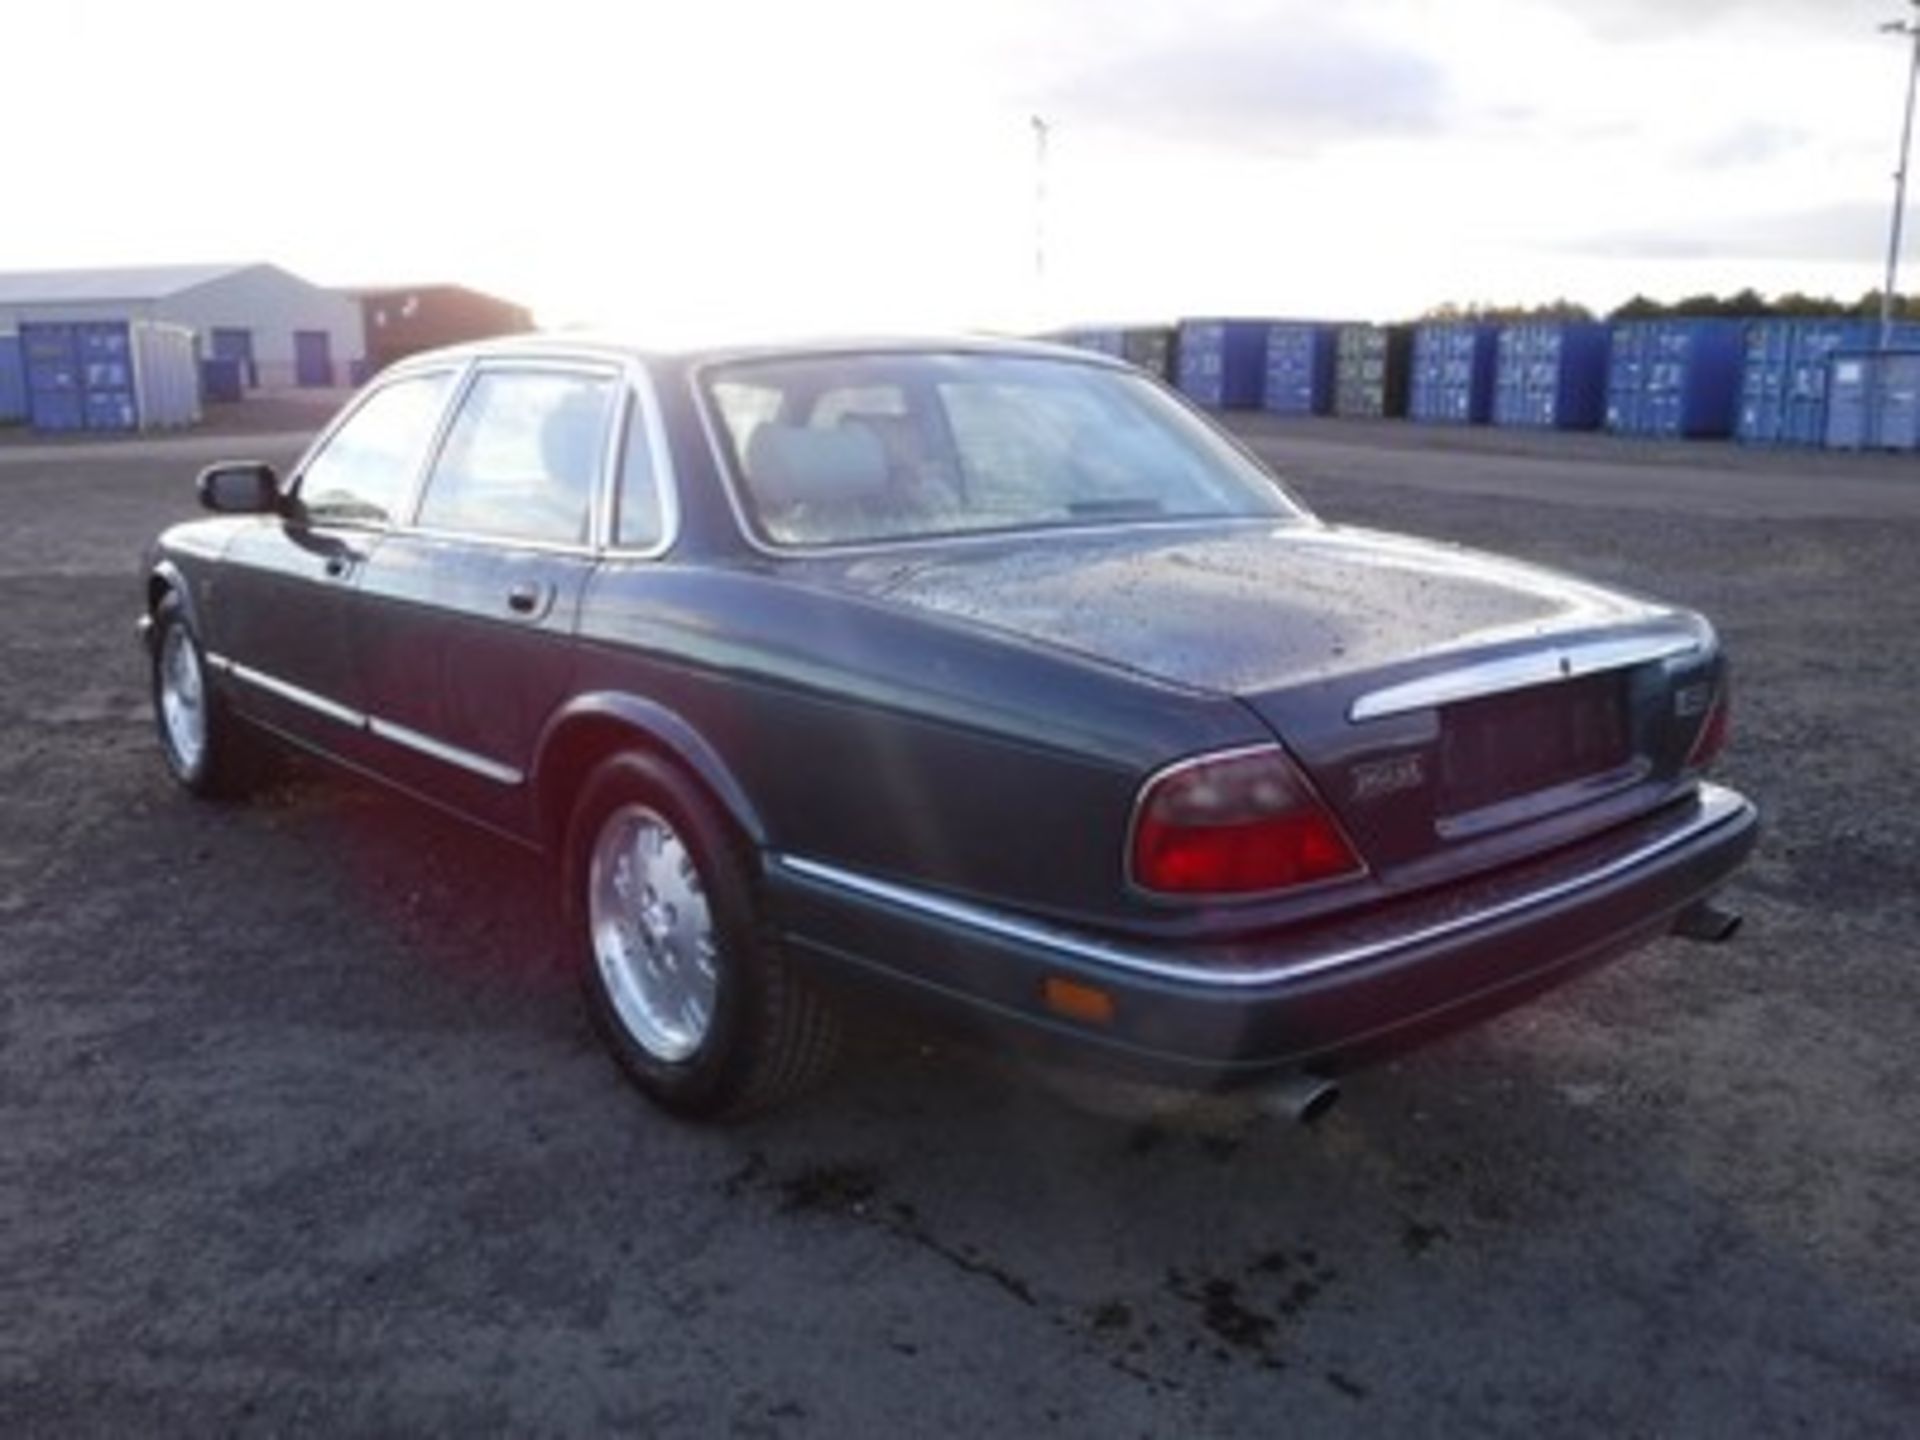 1994 JAGUAR SOVERIEGN 4.0 AUTOMATIC - Chassis number: SAJJHALD3BJ725900 Chassis number: SAJJHALD3B - Image 2 of 18